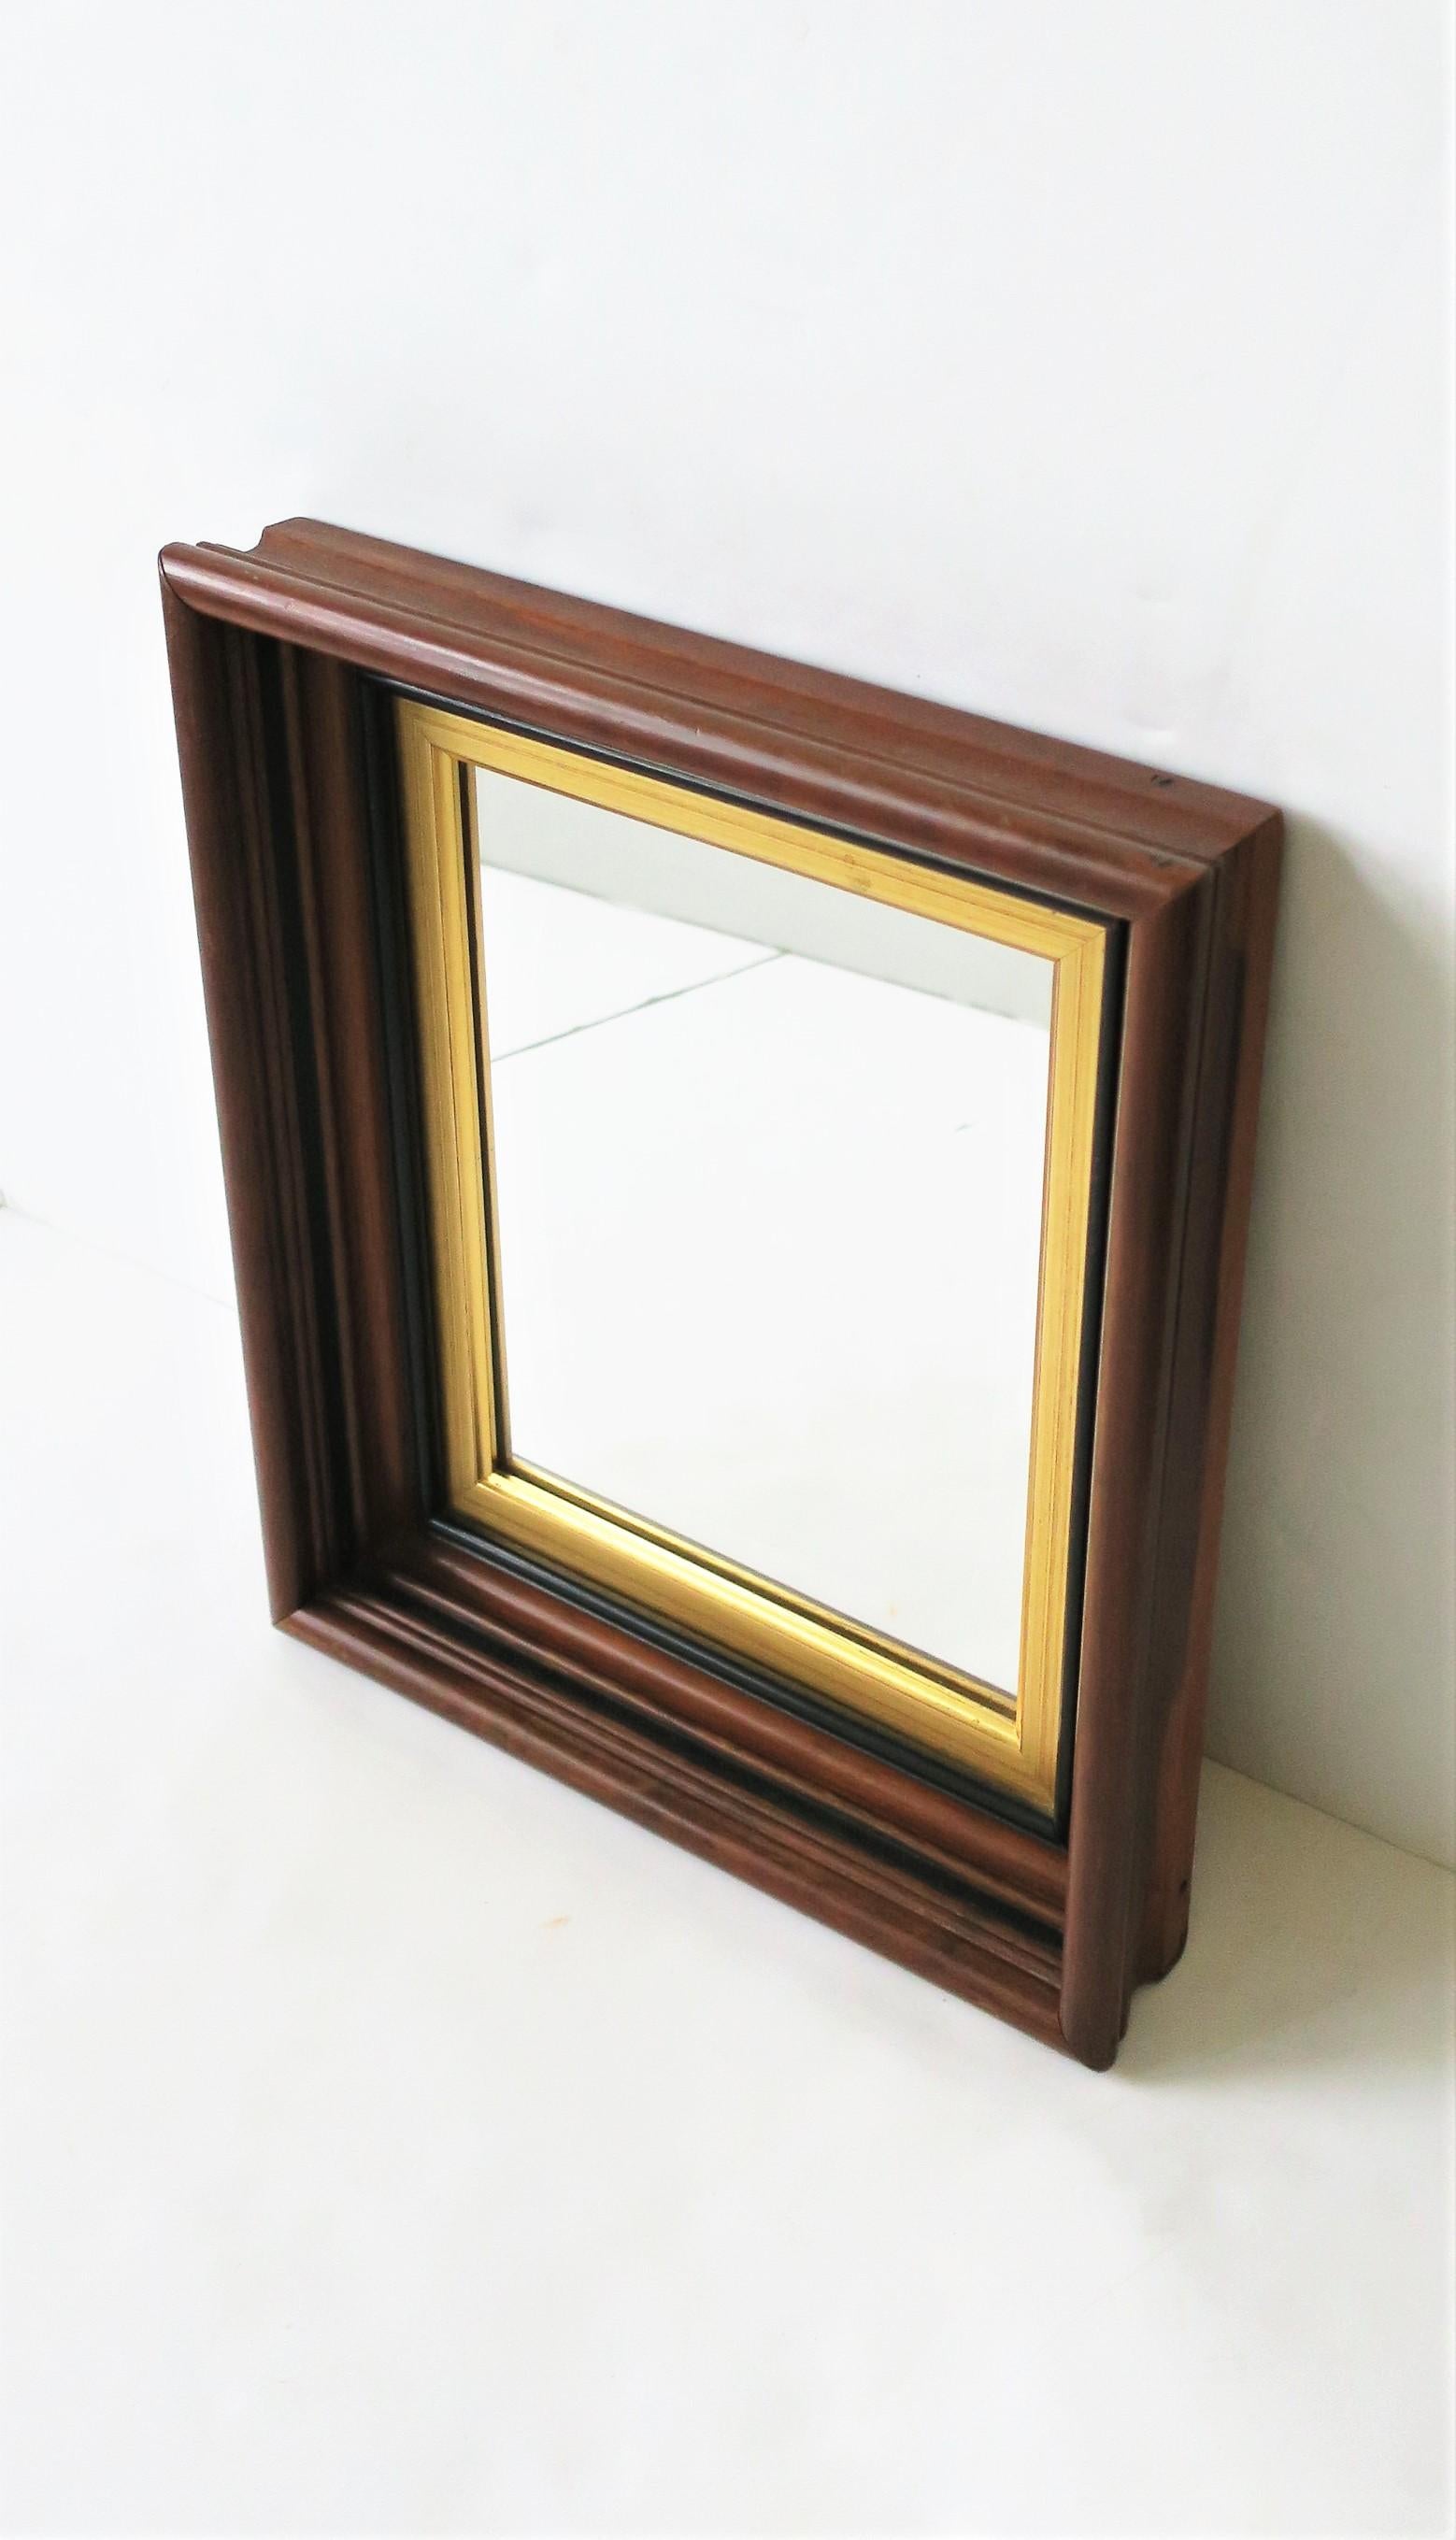 20th Century Brown Wood and Gold Giltwood Framed Wall or Vanity Mirror